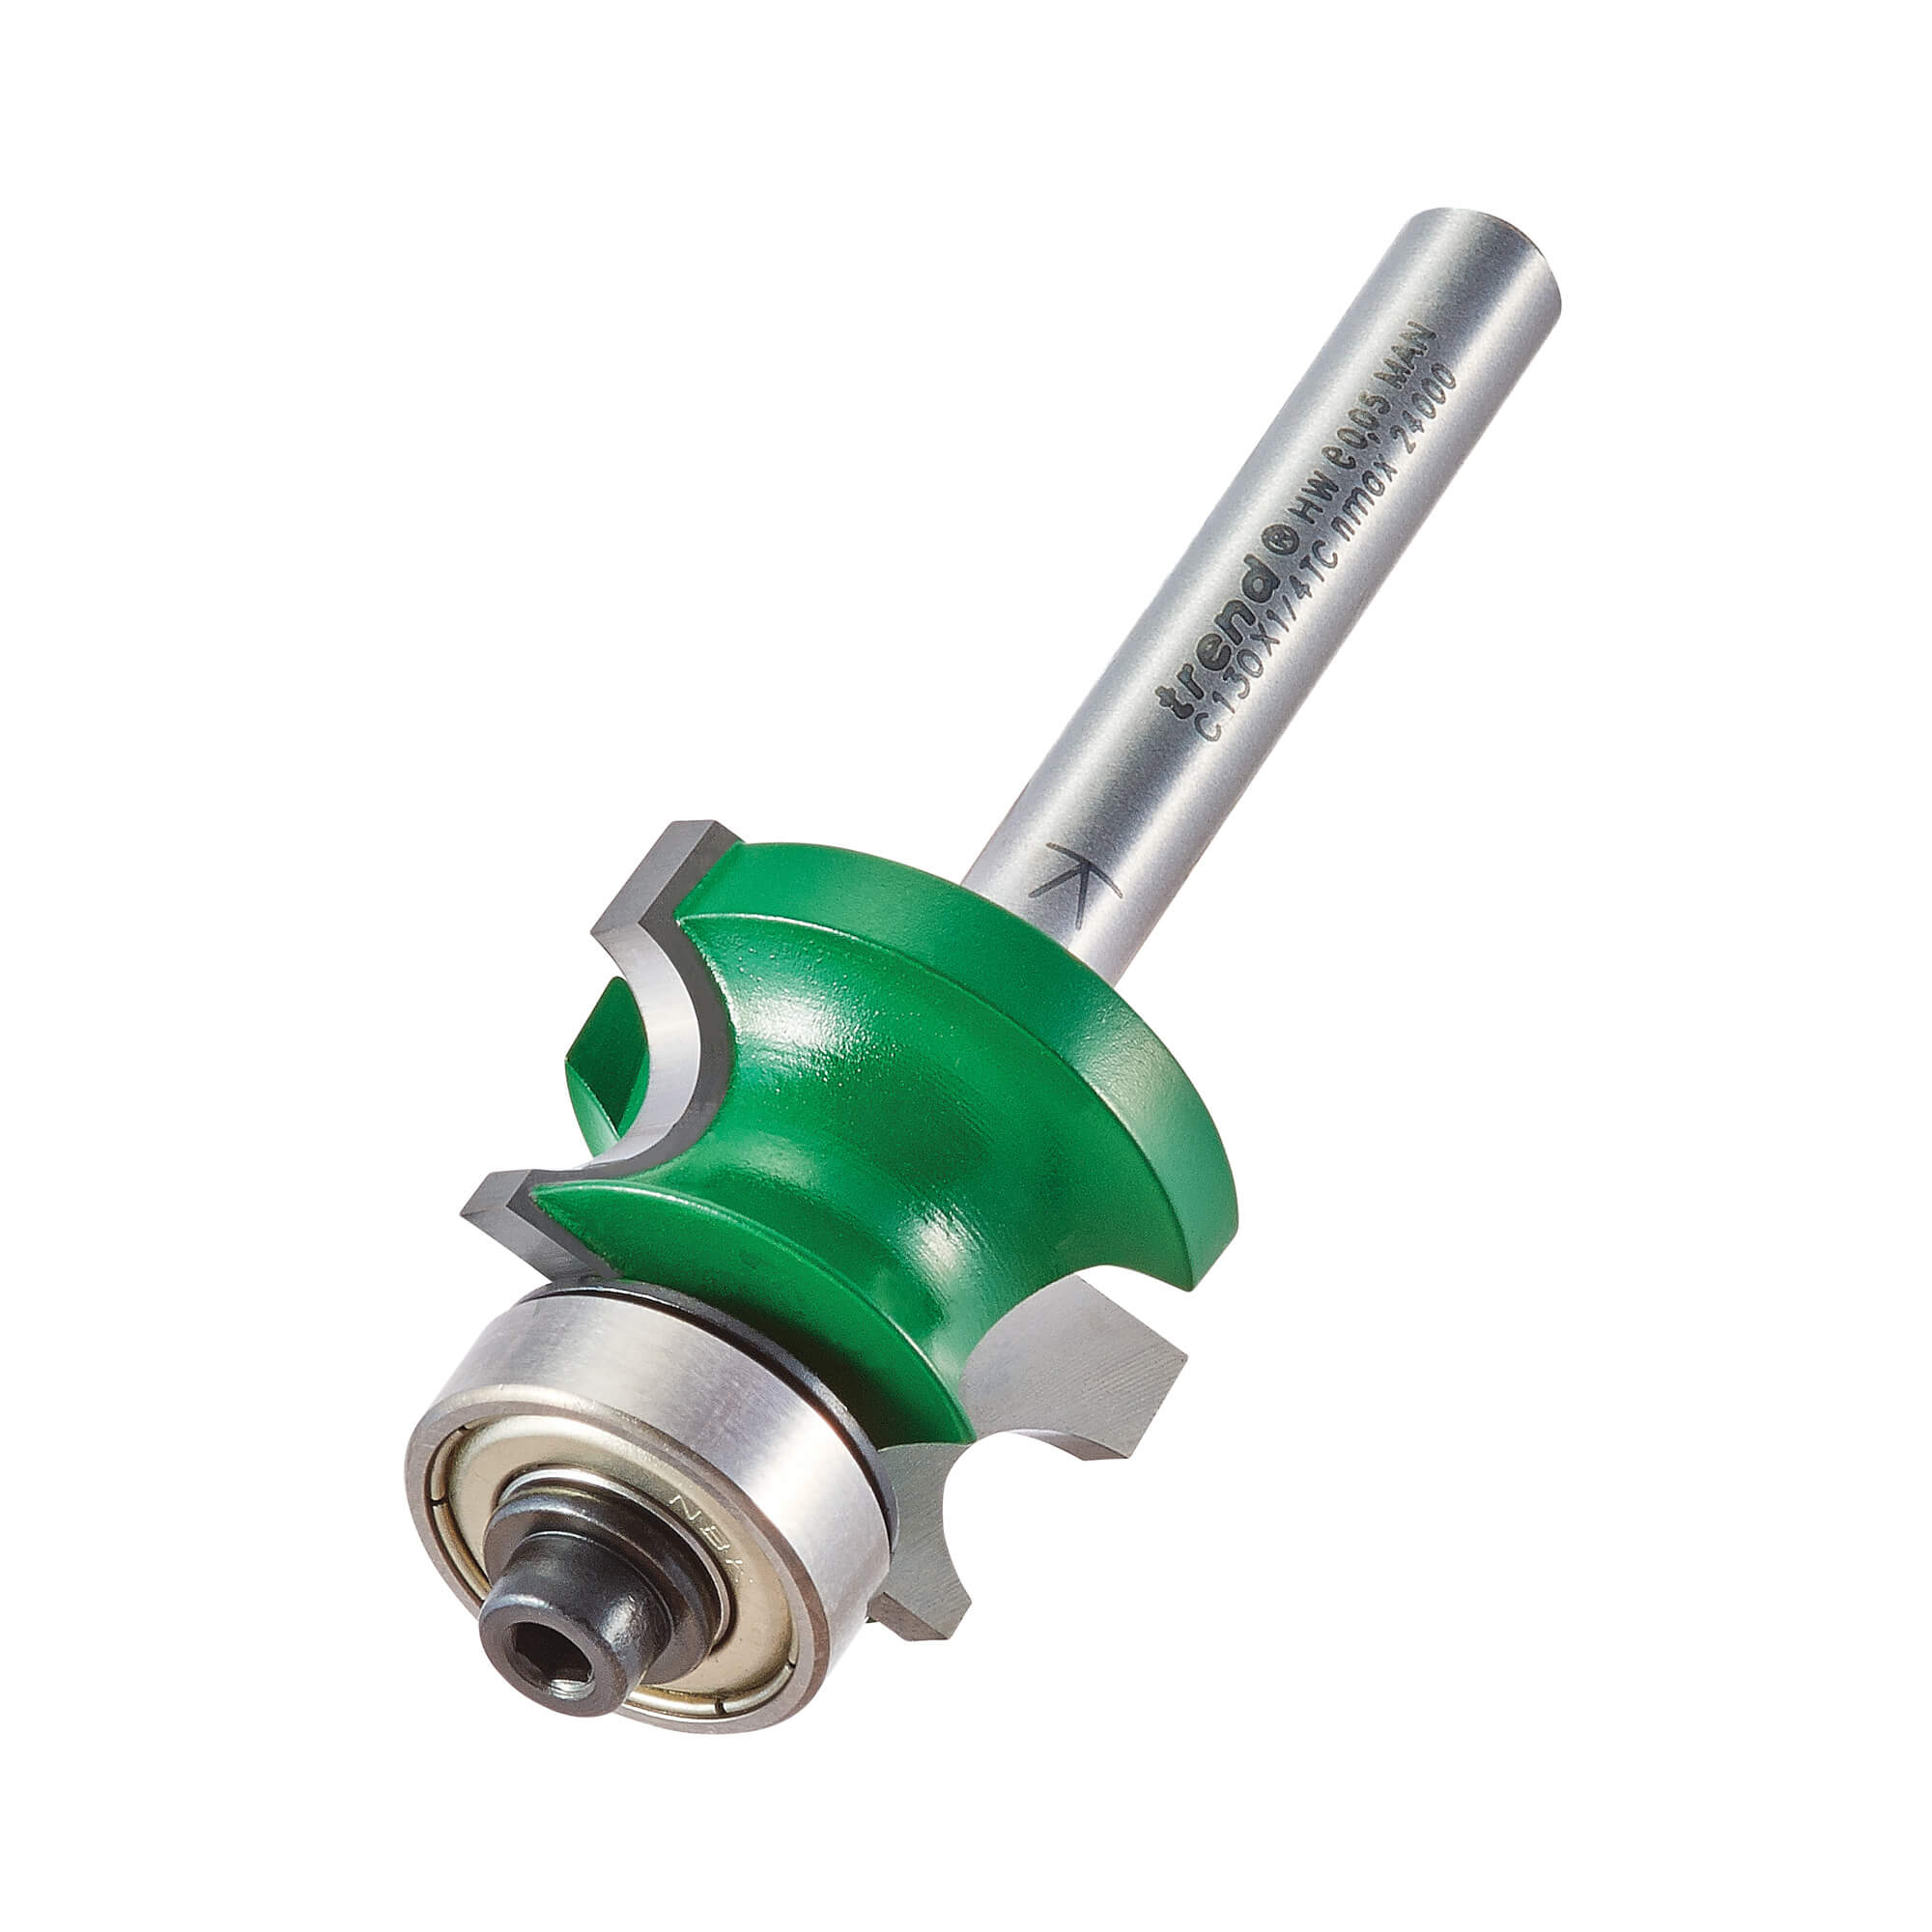 Image of Trend CRAFTPRO Bearing Guided Corner Bead Router Cutter 26mm 16mm 1/4"